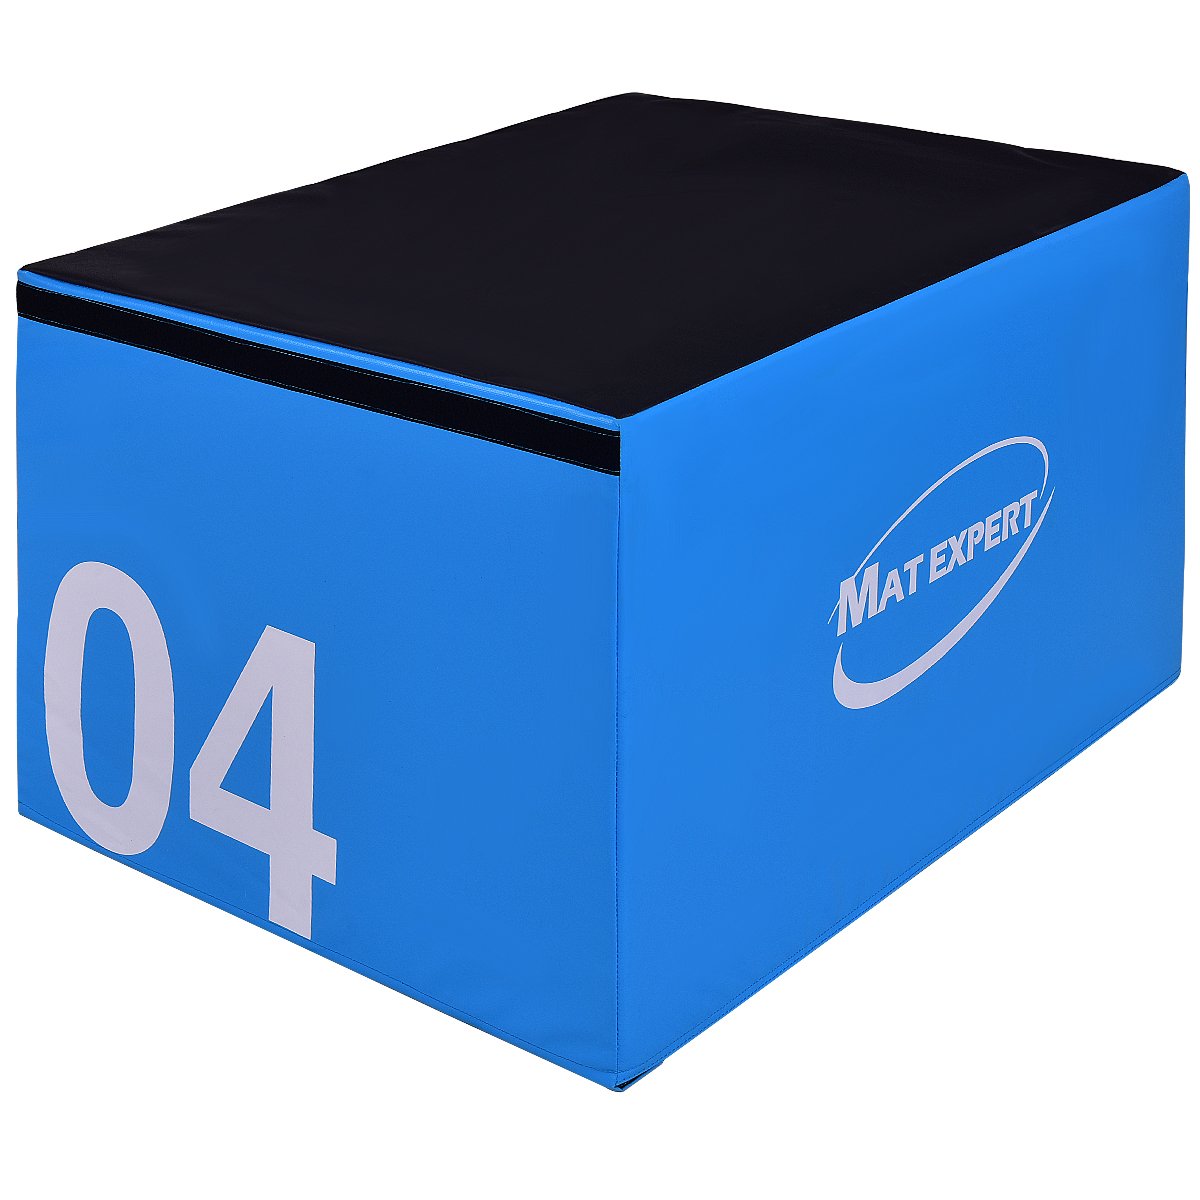 MAT EXPERT 3 in 1 Plyometric Box, Jumping Box with Foam for Jump Training and Conditioning